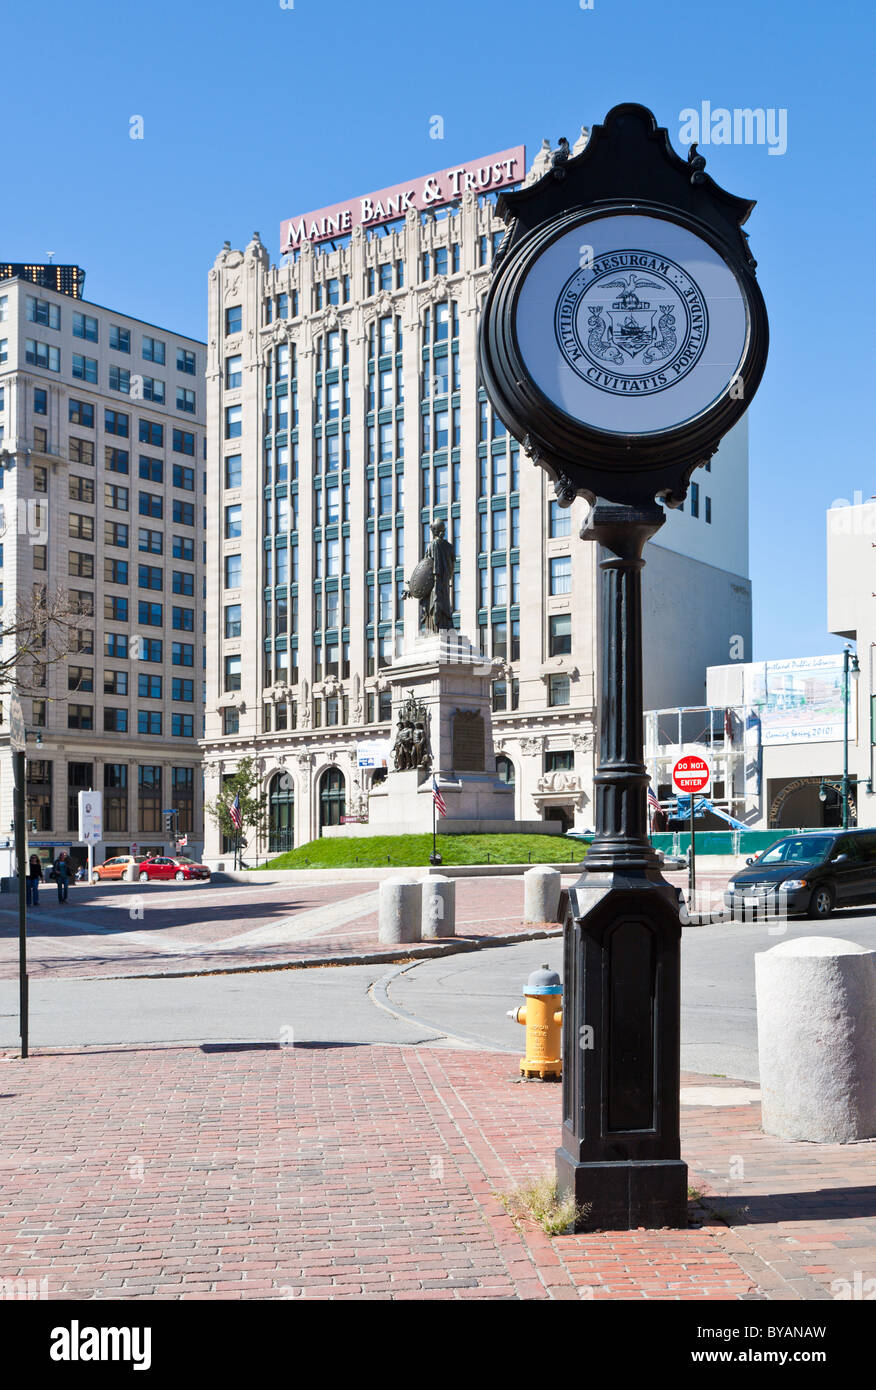 Lamp post with the Seal of the City downtown in Portland, Maine Stock Photo